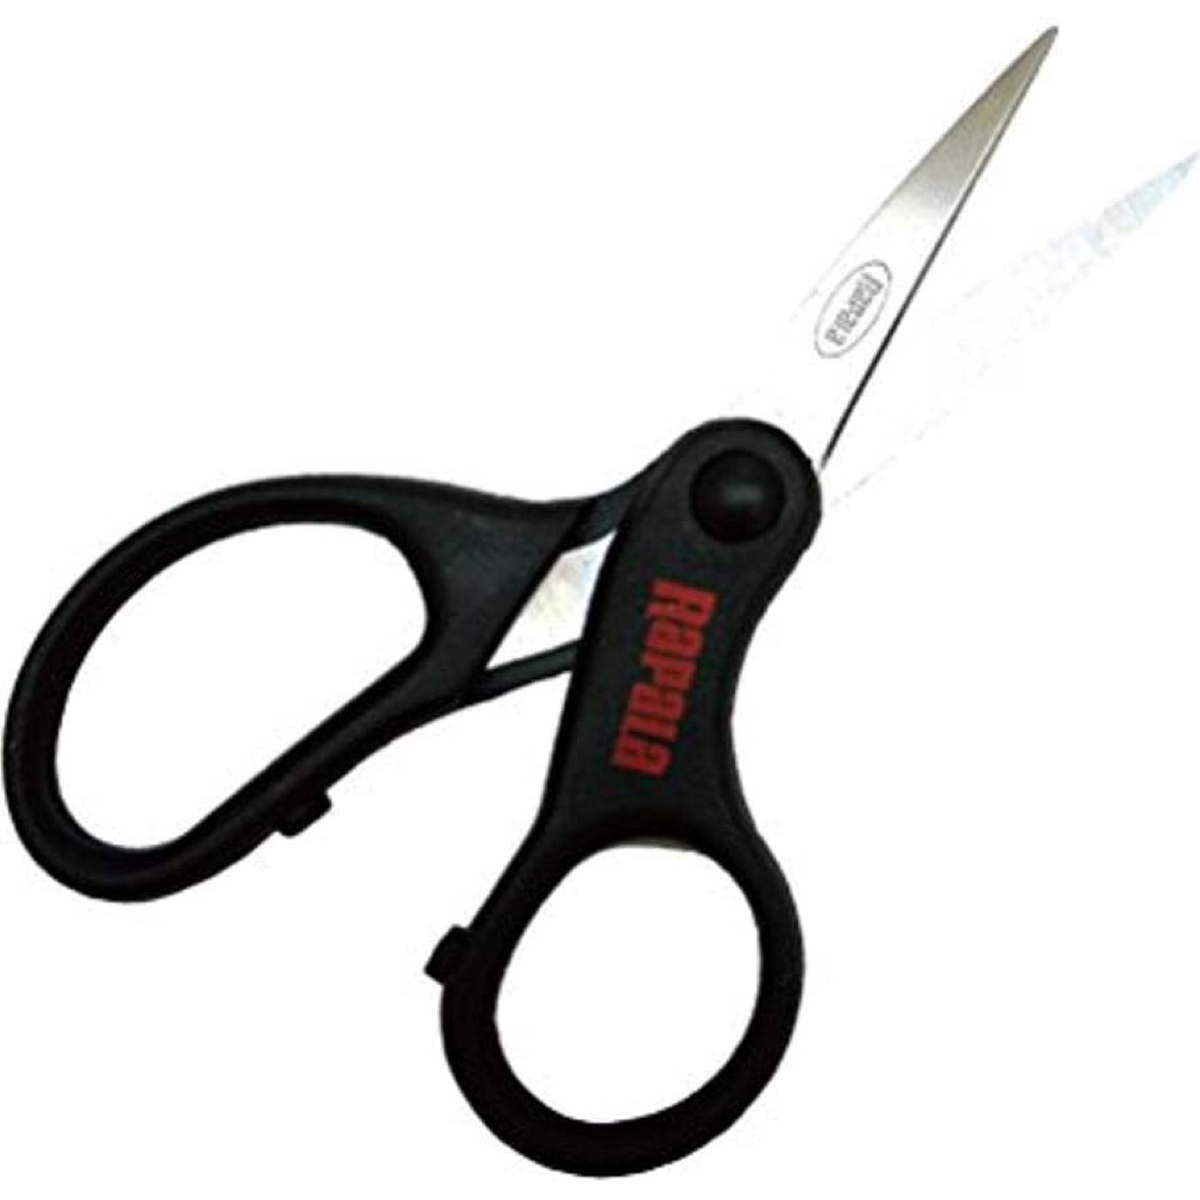 Photo of Rapala Super Line Scissors for sale at United Tackle Shops.